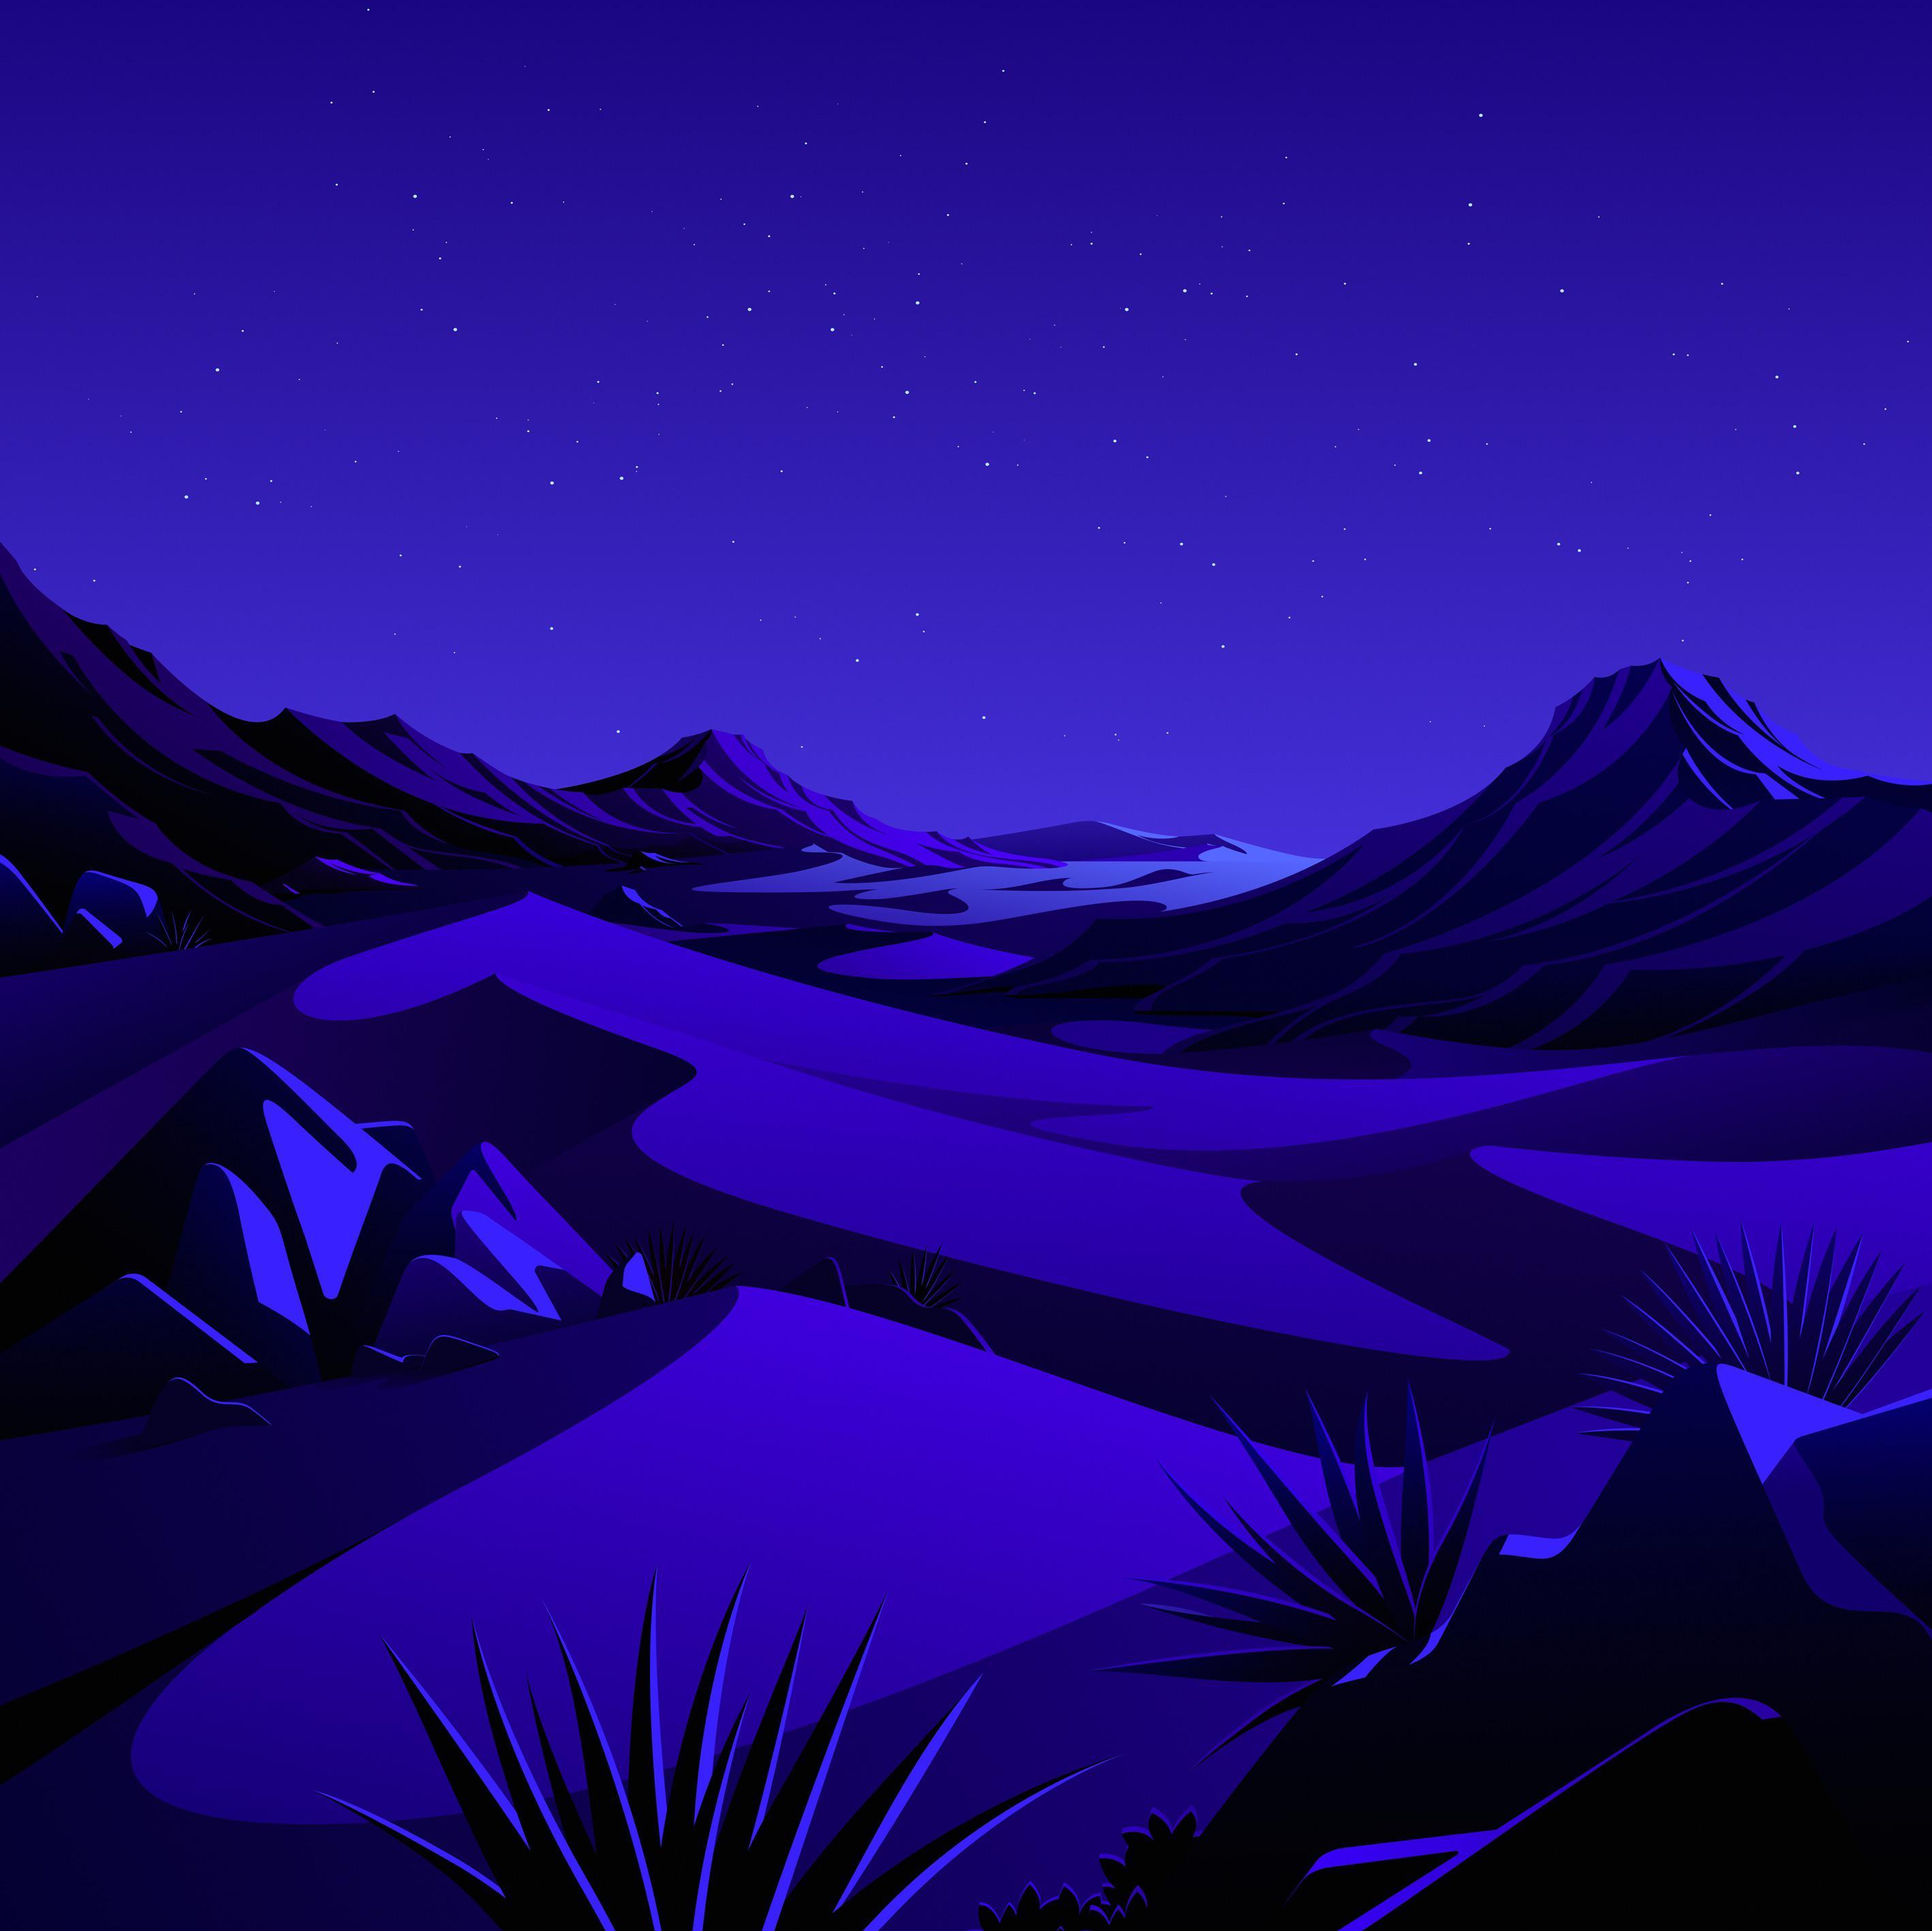 Am I Going Insane Or Is This Background No Longer In iPados